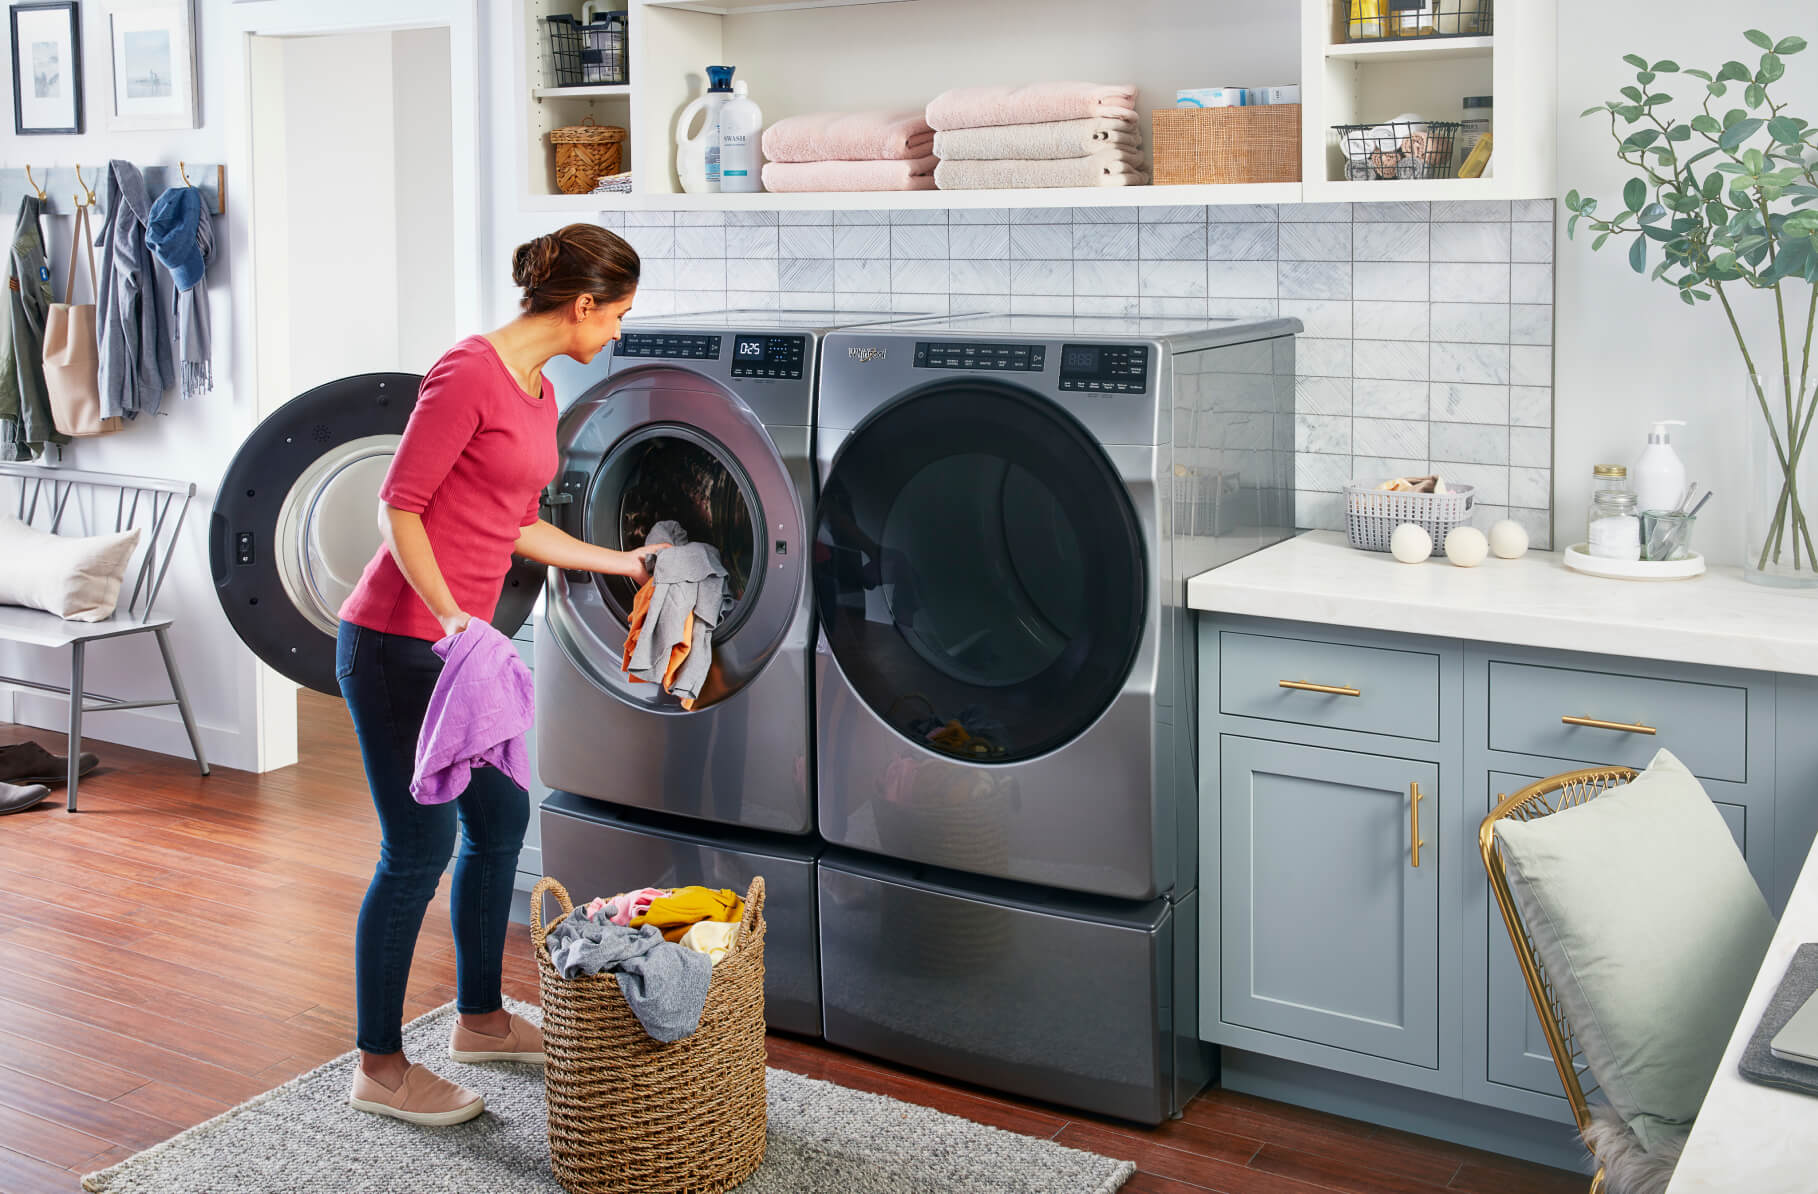 The Best Way To Clean Your Washing Machine